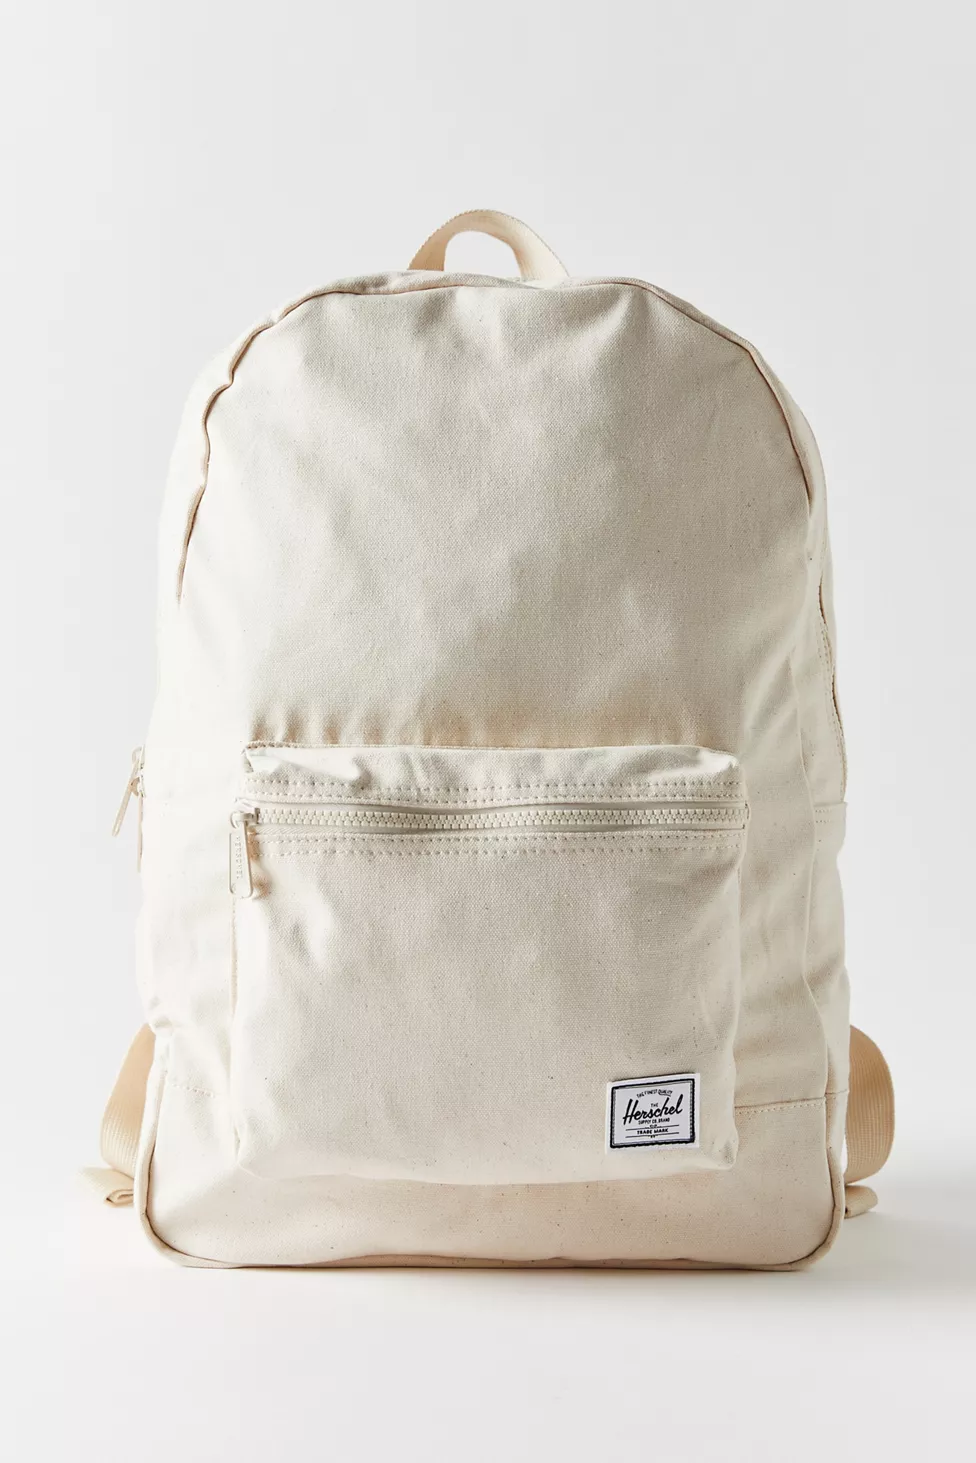 15 Things From Urban Outfitters That You Definitely Need For Back To School